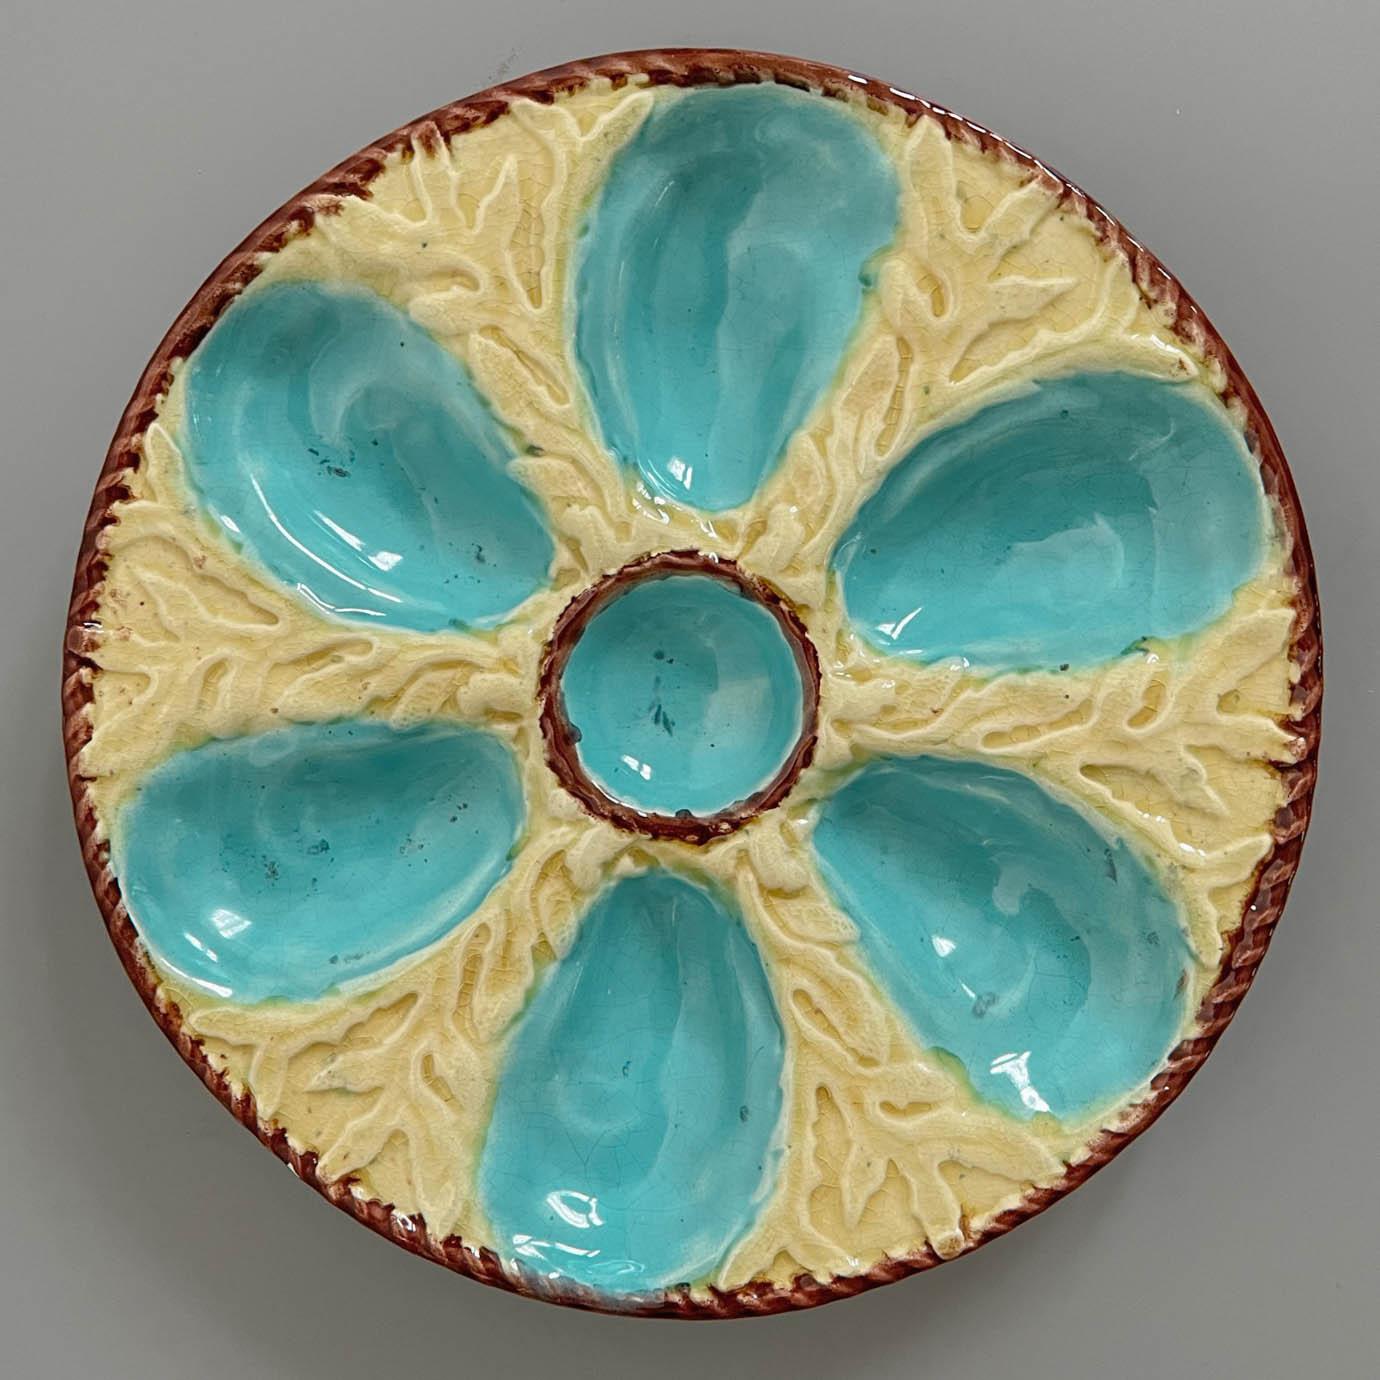 A 19th Century English glazed majolica oyster plate with six turquoise blue oyster wells surrounding a center well for sauce on a yellow ground with seaweed relief. A brown nautical rope border encircles the center well and the outer rim. The verso